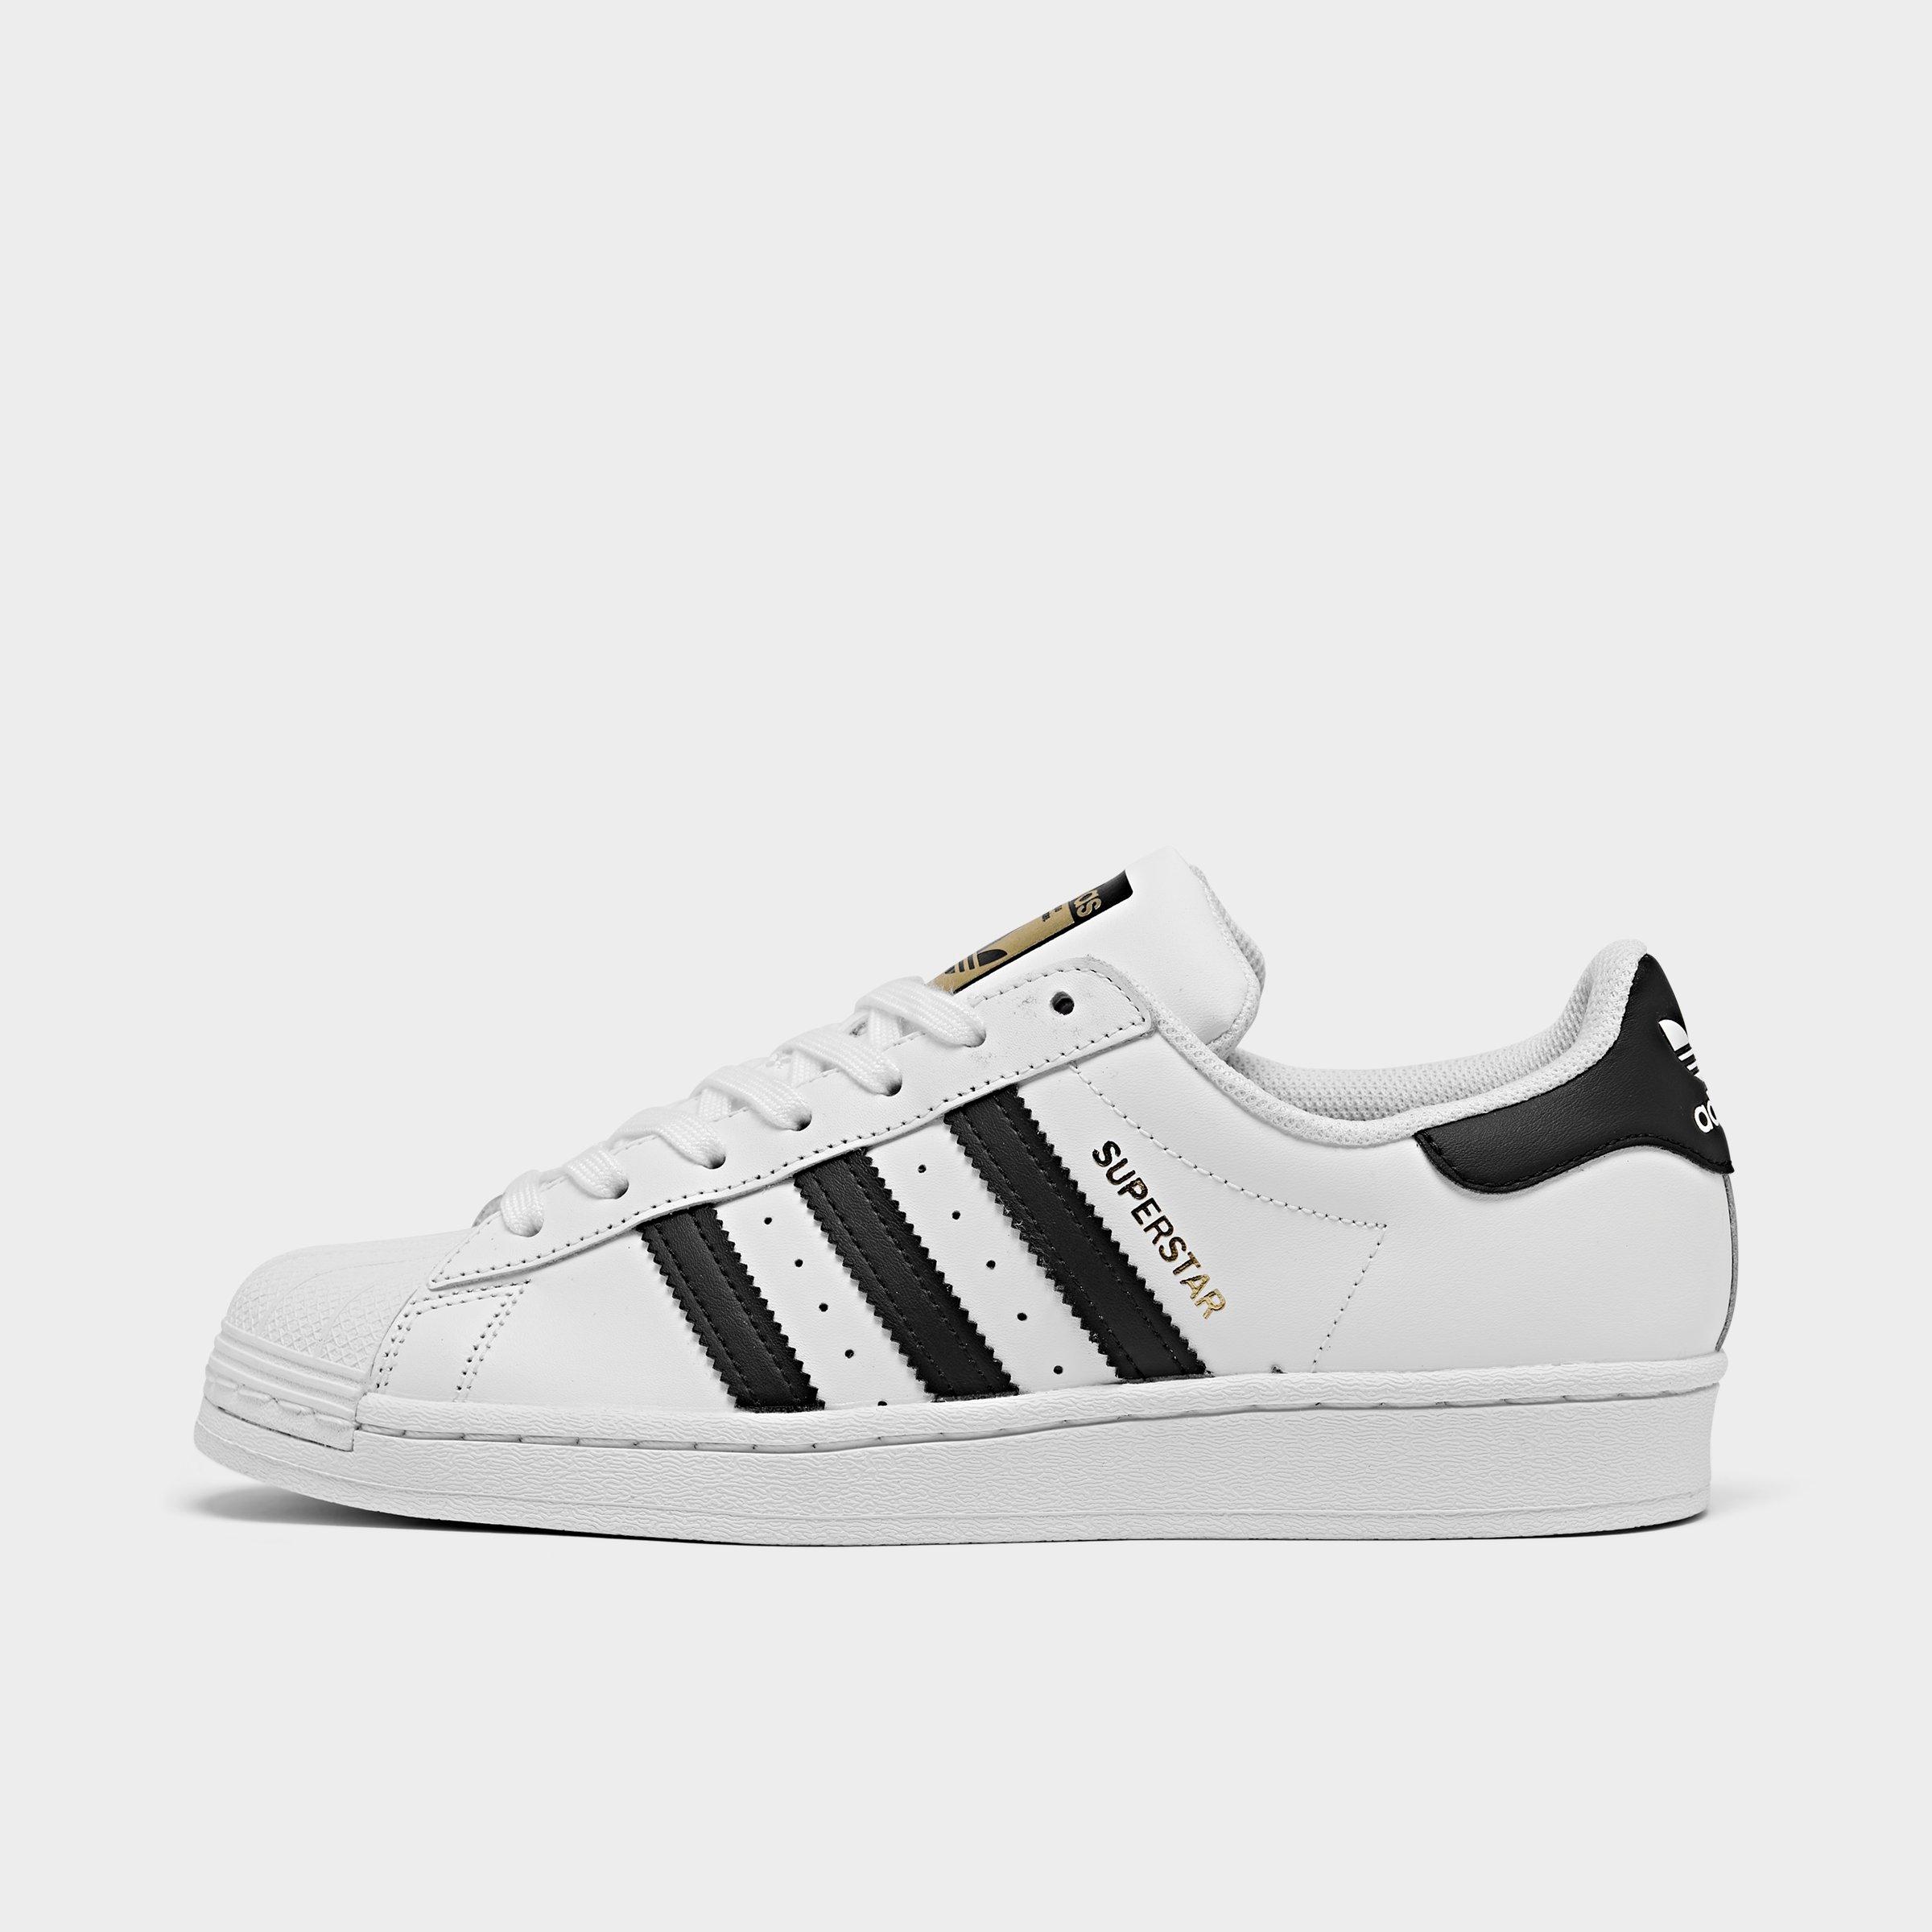 old school black and white adidas